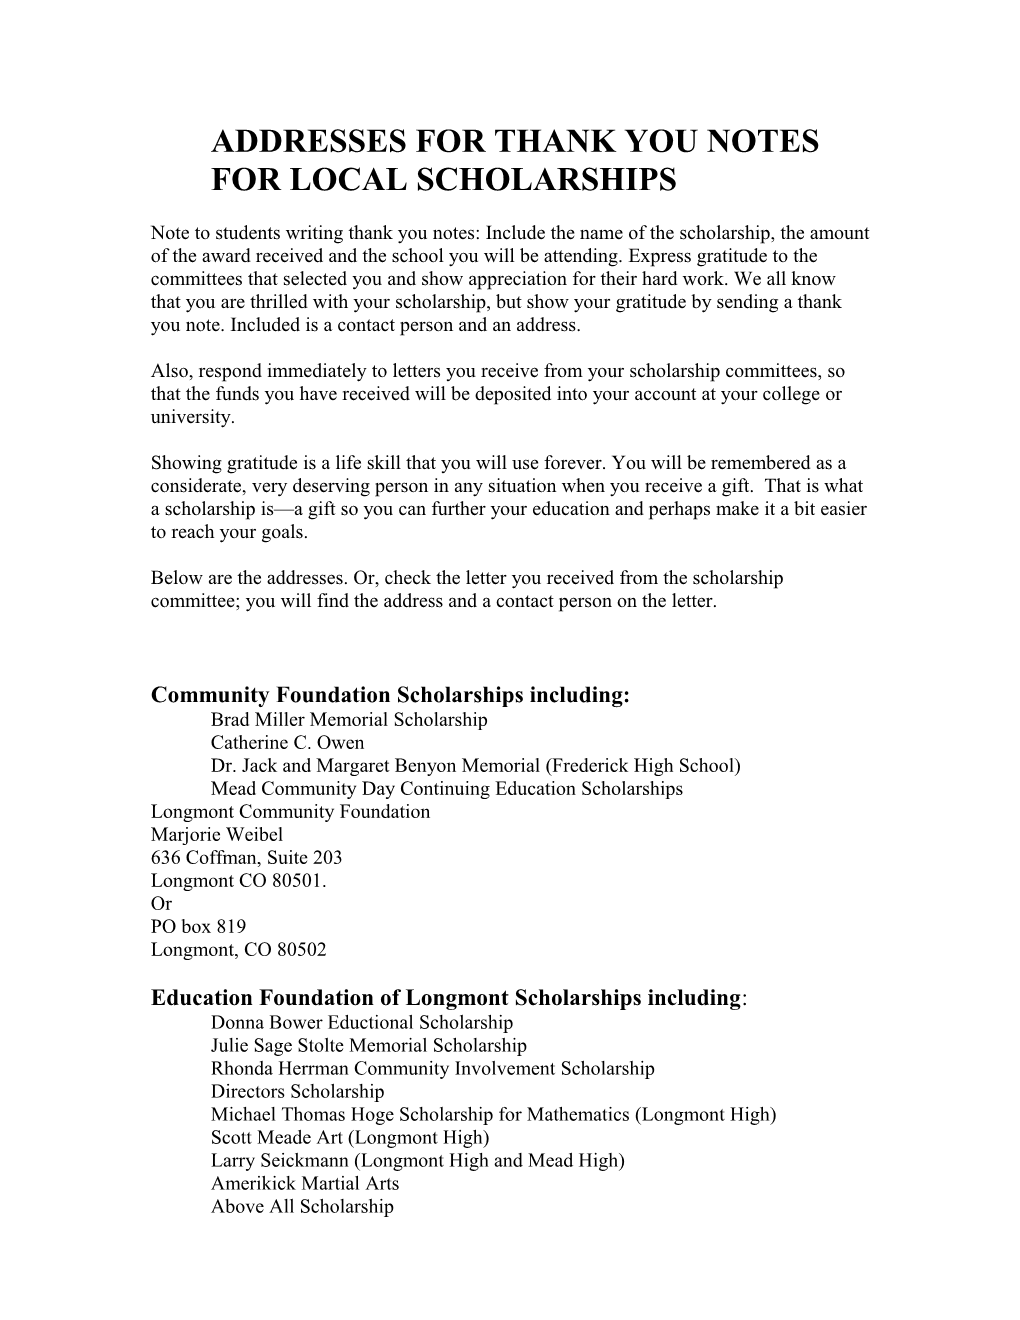 Addresses for Thank You Notes for Local Scholarships